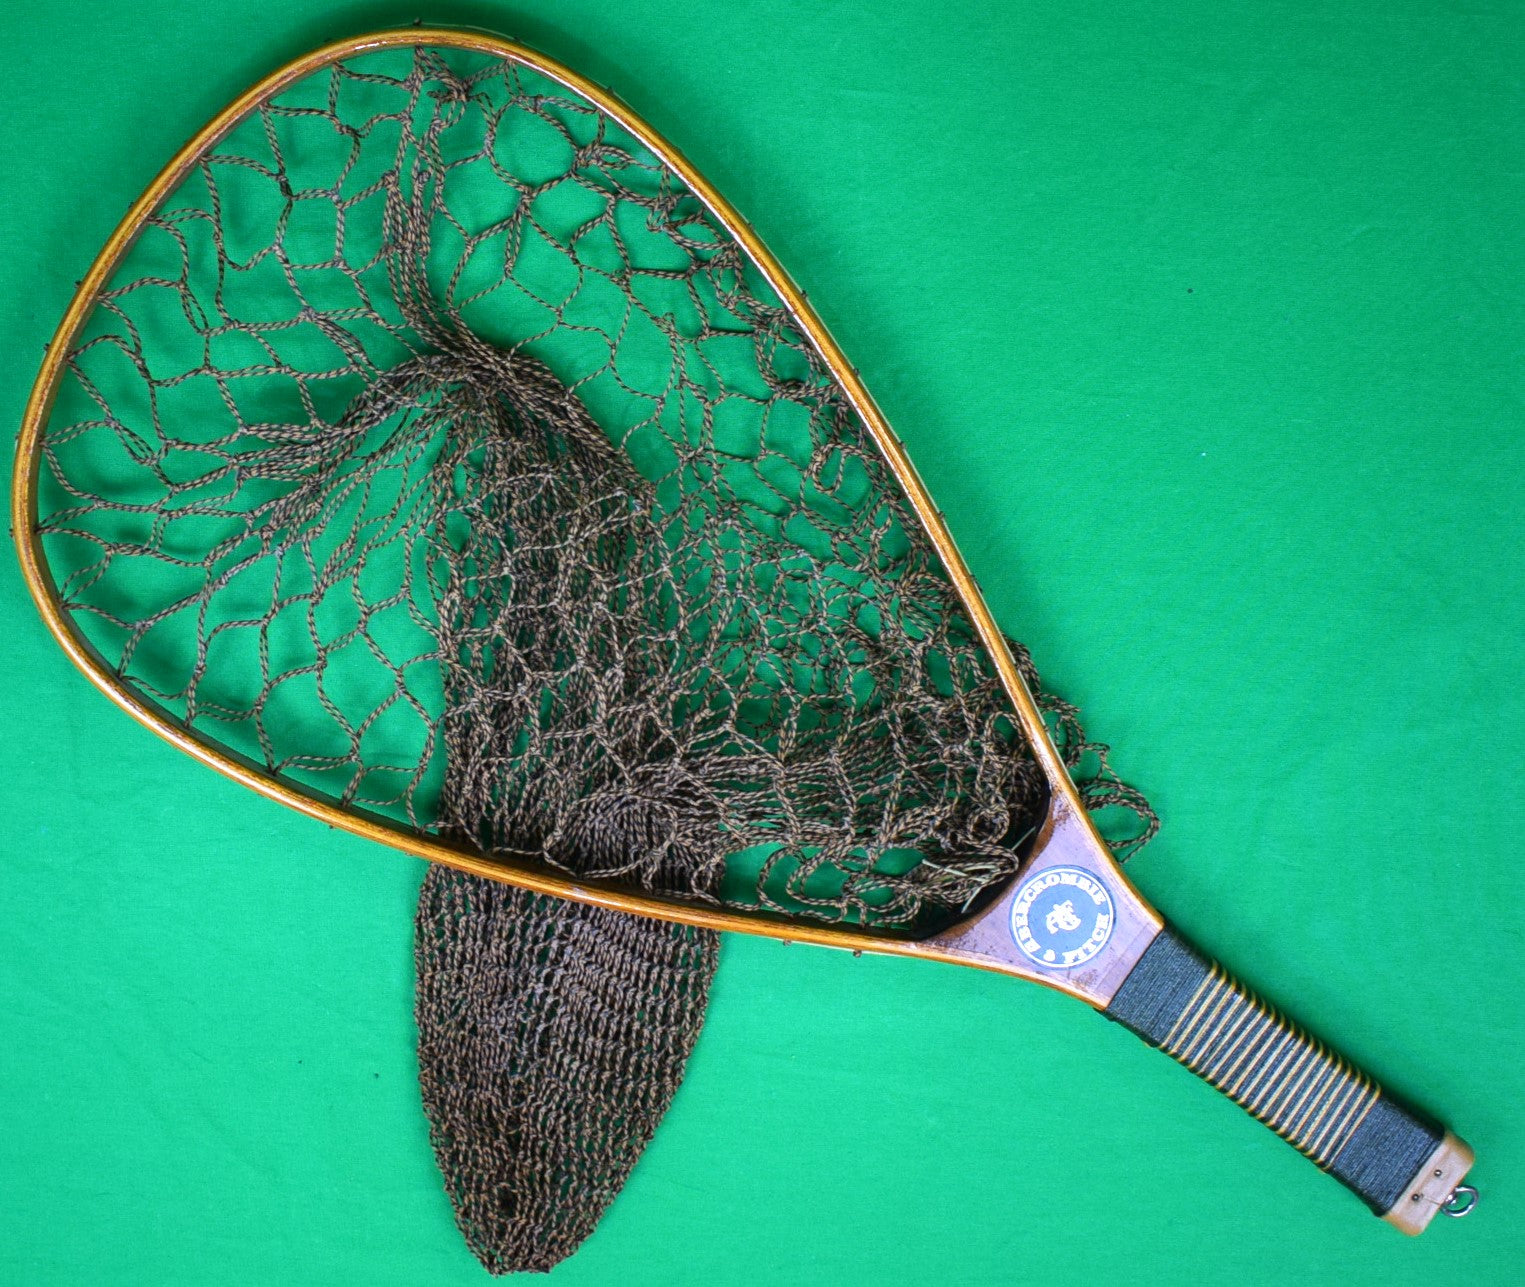 Abercrombie & Fitch Landing Net (SOLD)